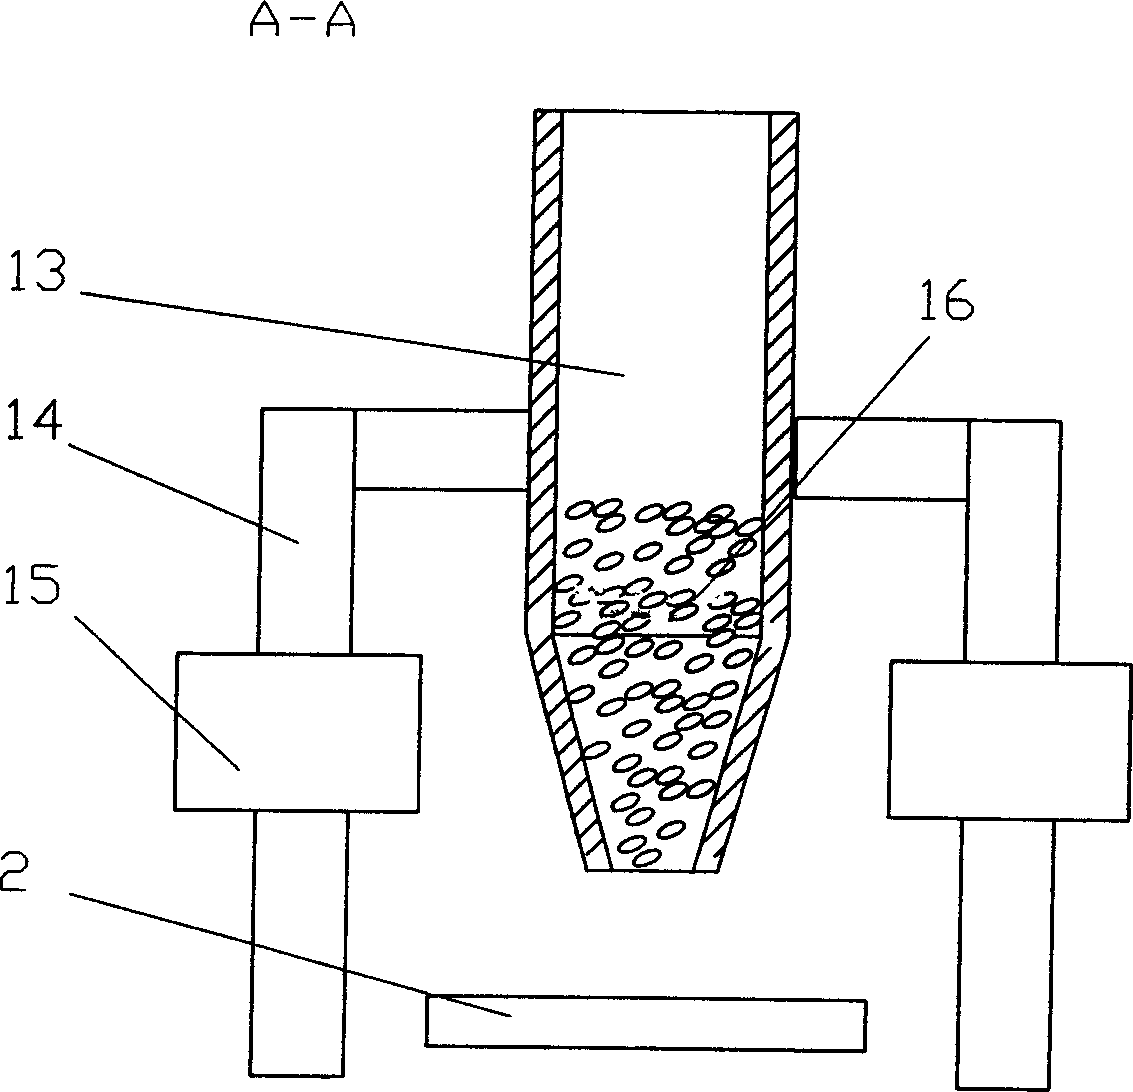 Method and apparatus for making mouse-sticking board